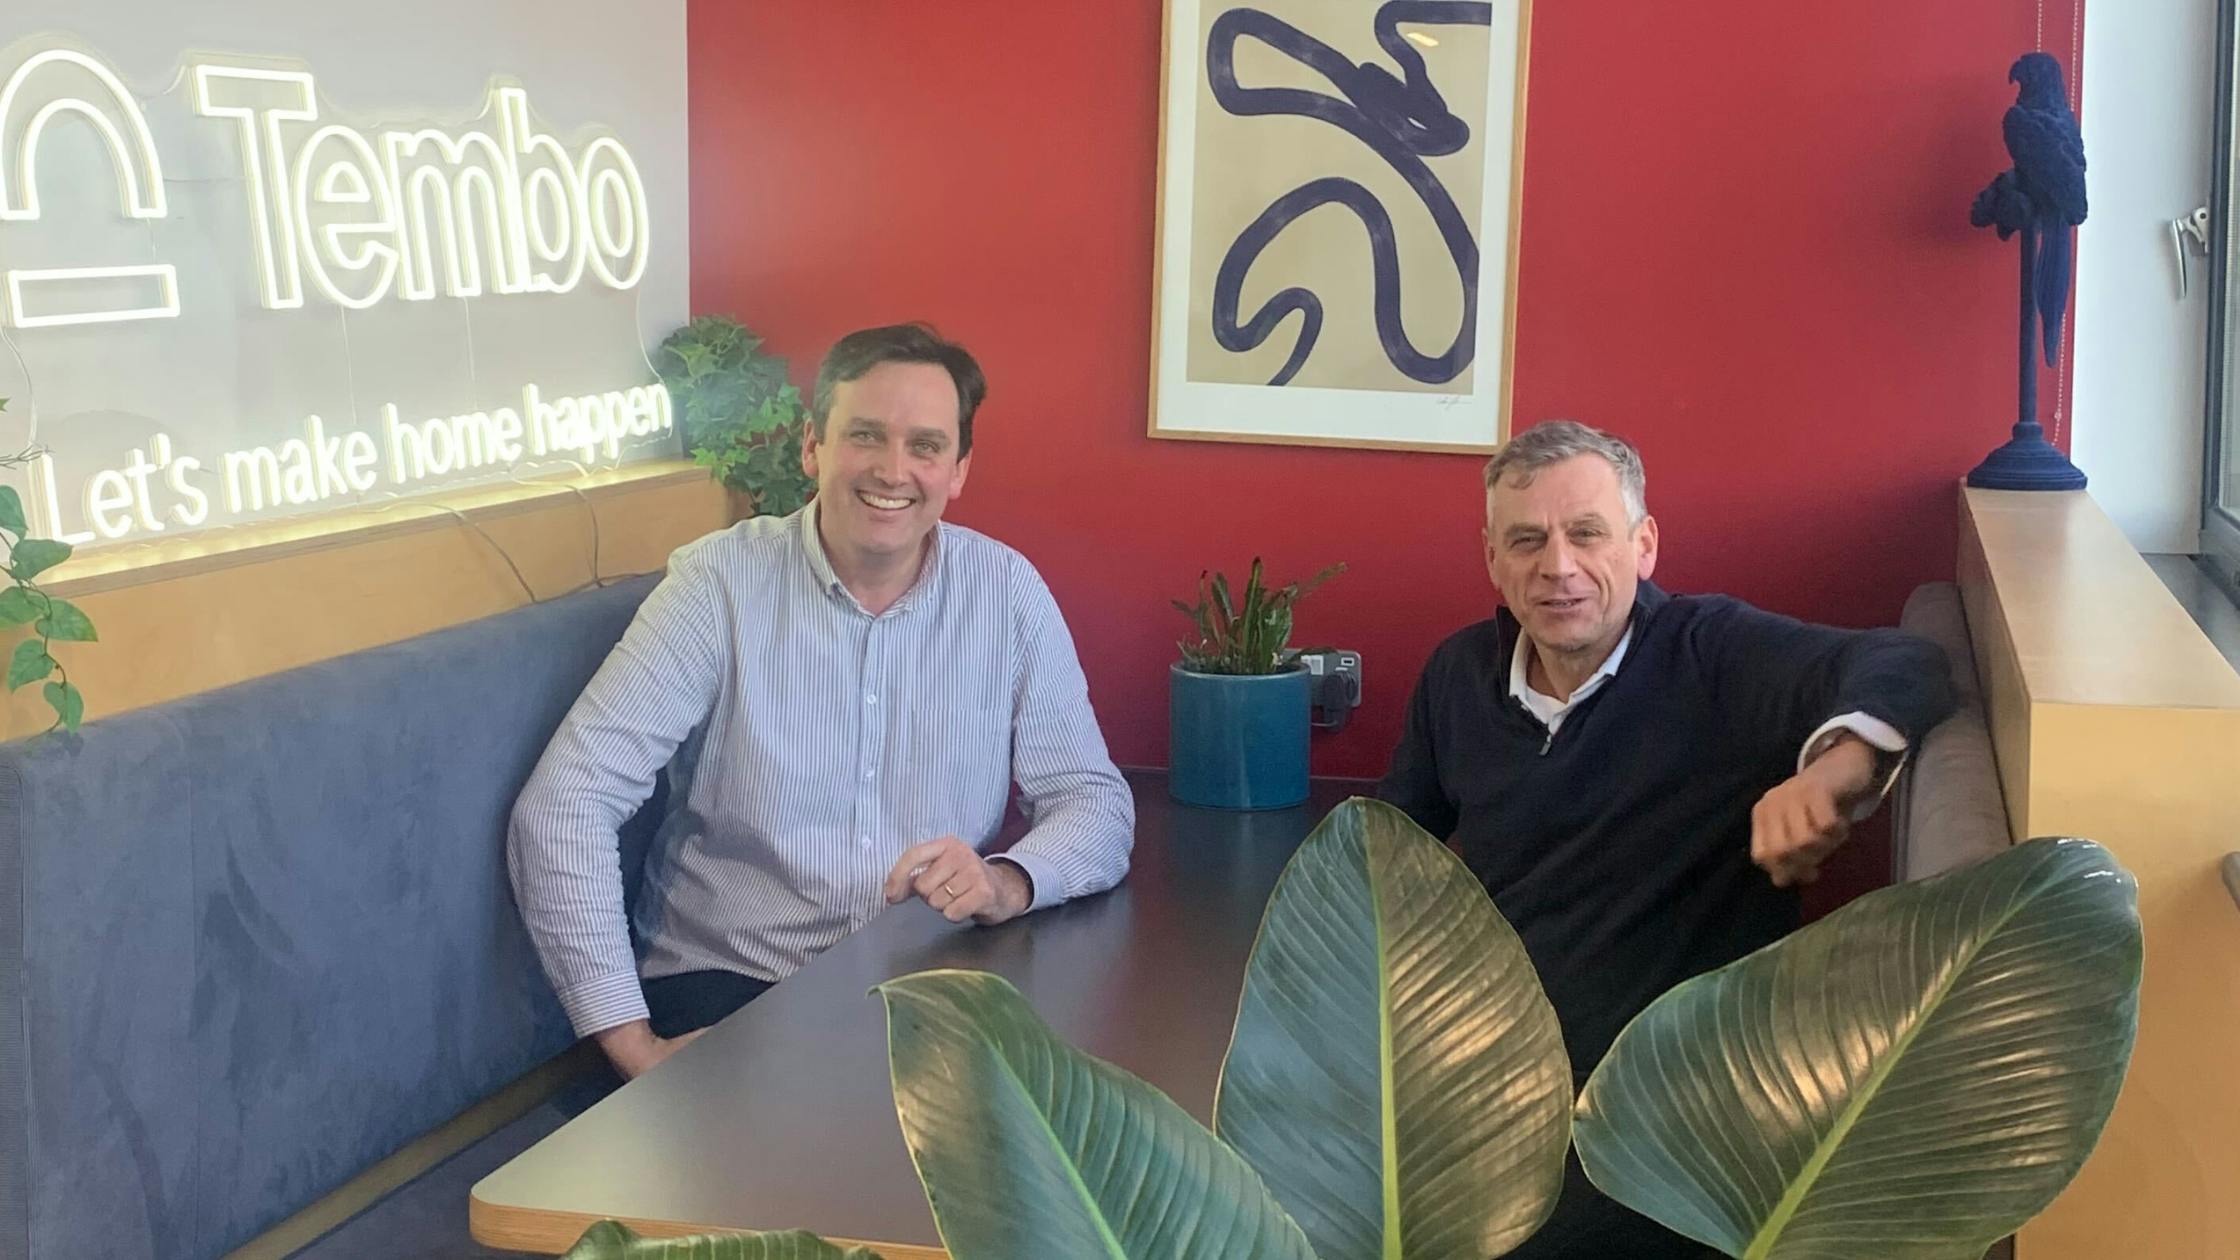 Richard Dana (CEO of Tembo) and Crawford Taylor (Founder and CEO of Nude)